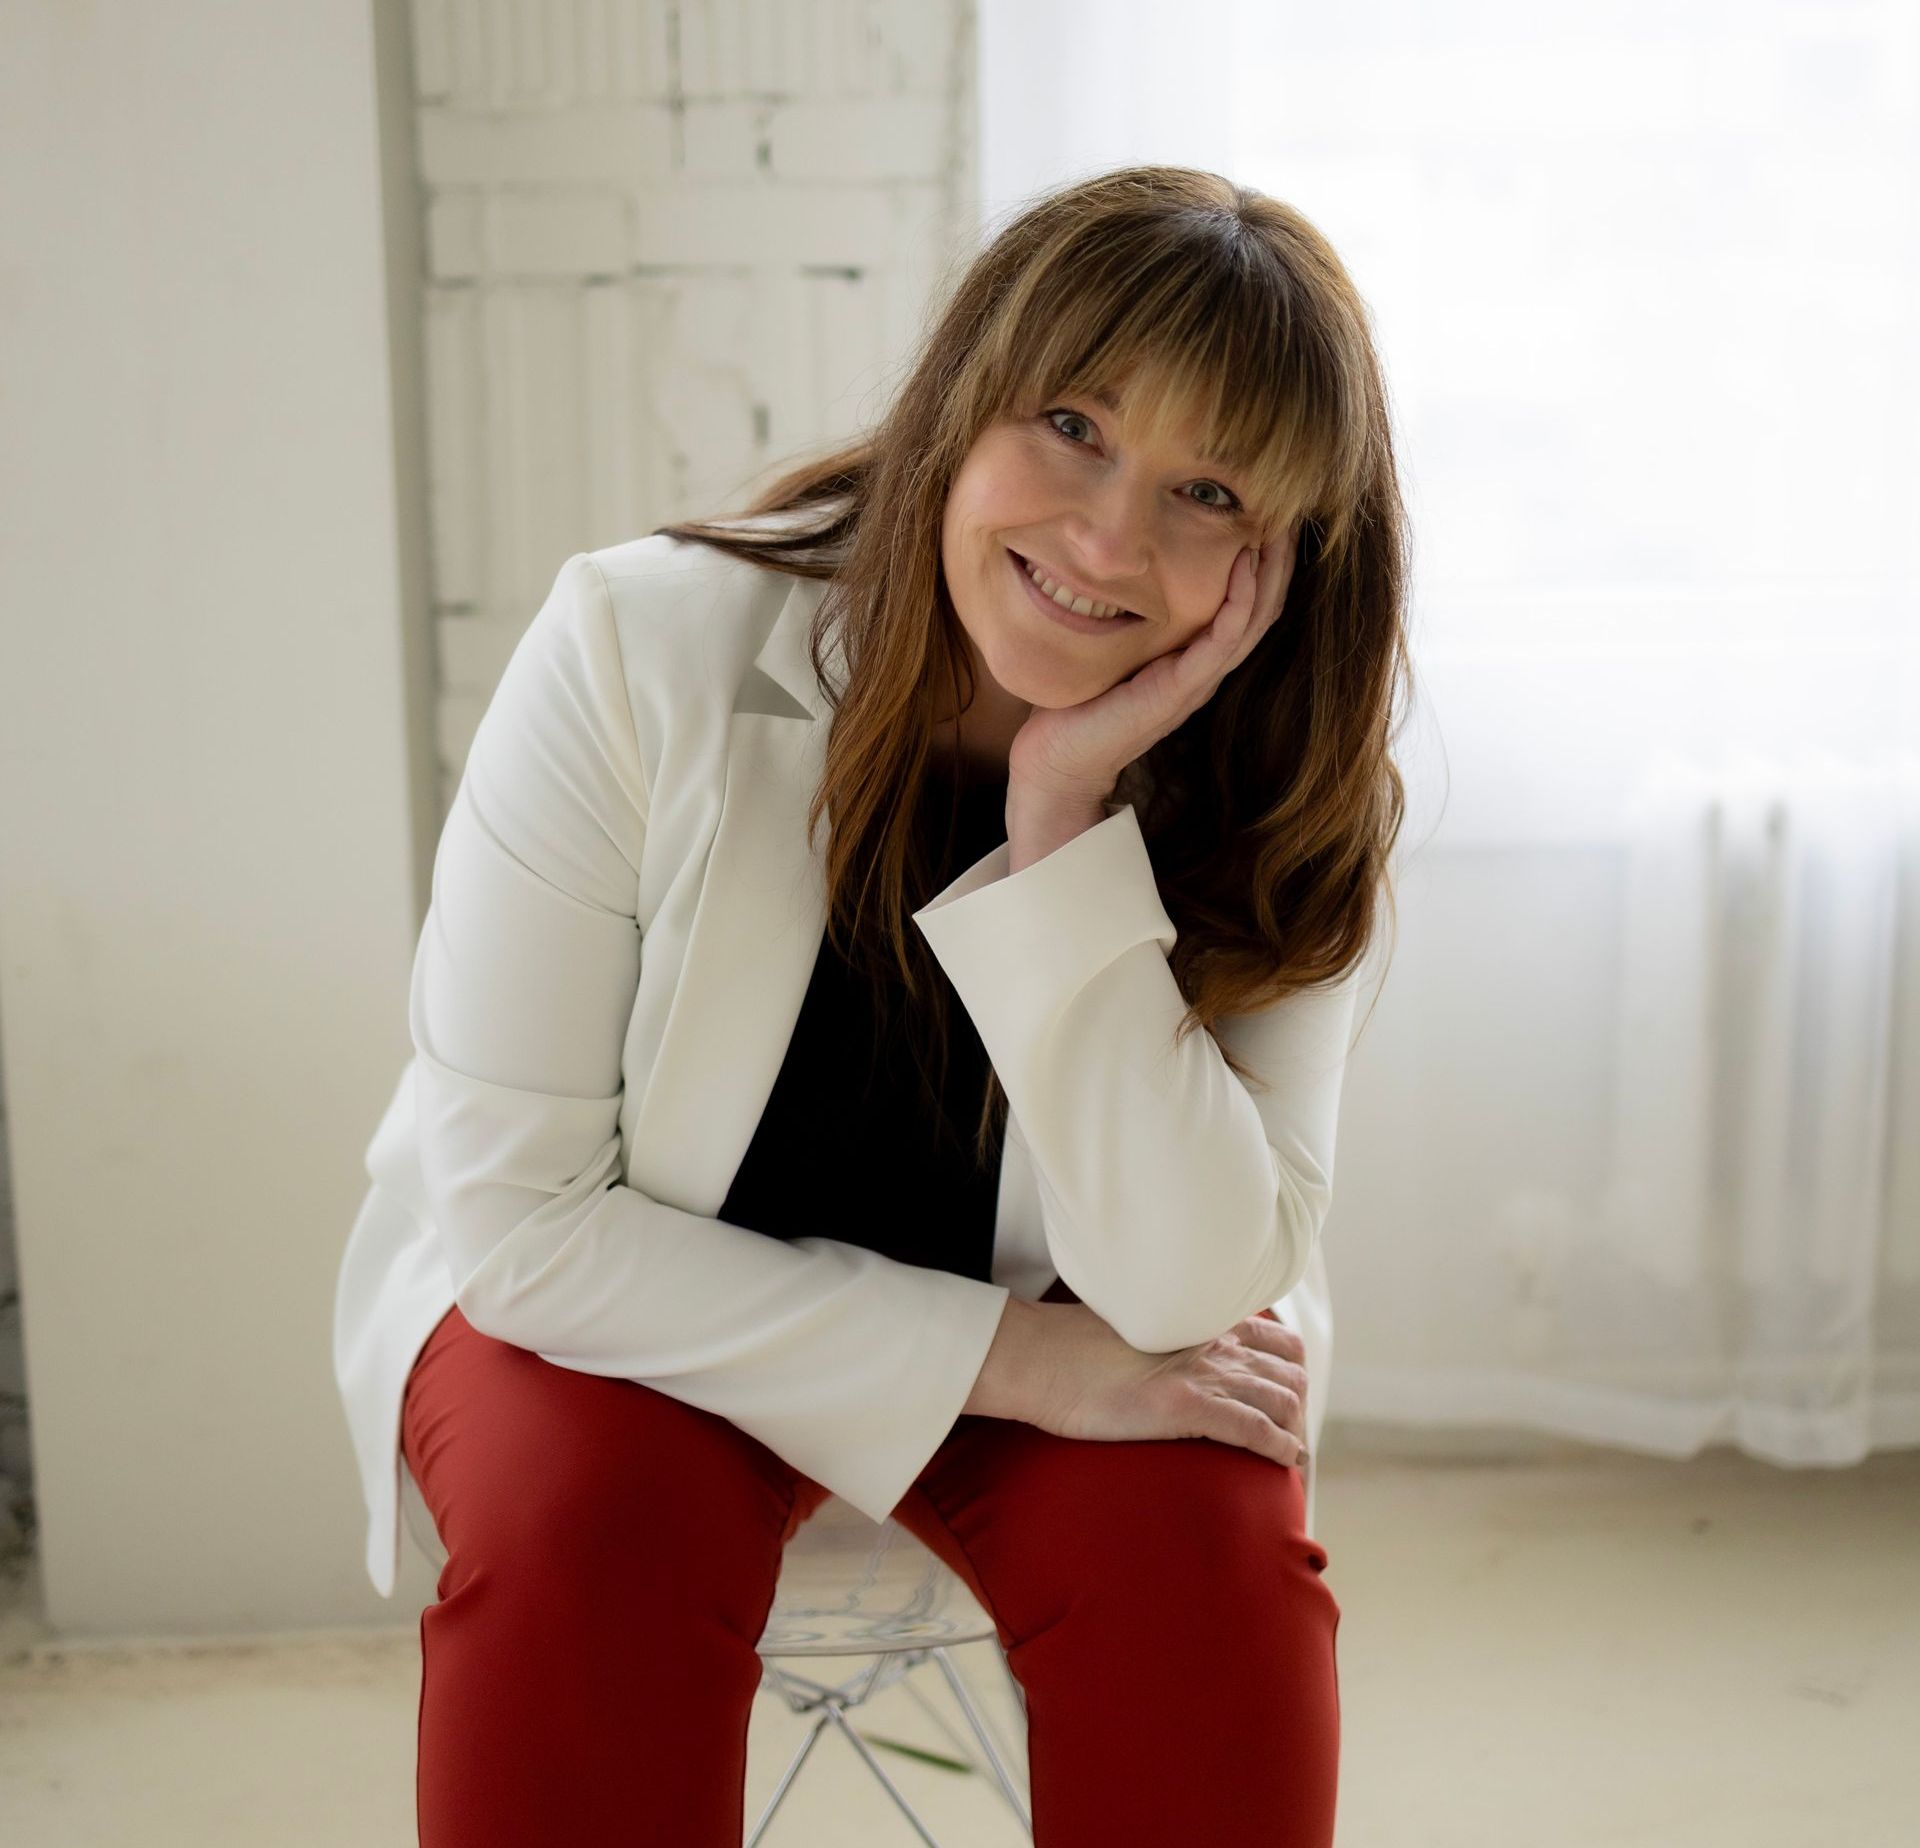 Brie Bacon, Founder of Allow Nourishment in a white jacket and red pants is sitting on a chair